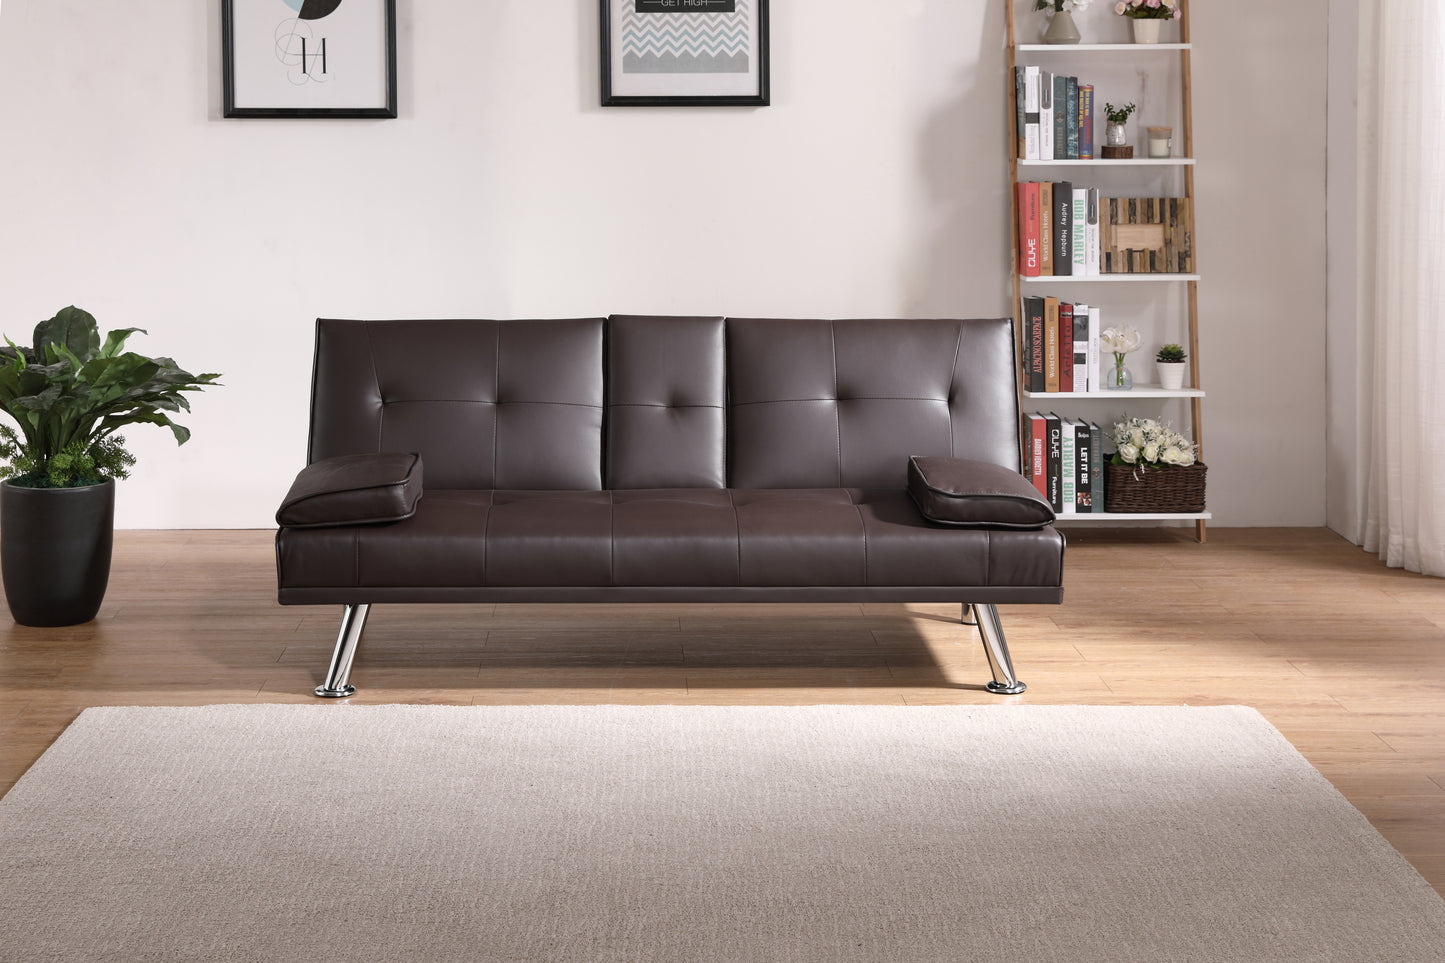 [New+Video] Brown Leather Multifunctional Double Folding Sofa Bed for Office with Coffee Table